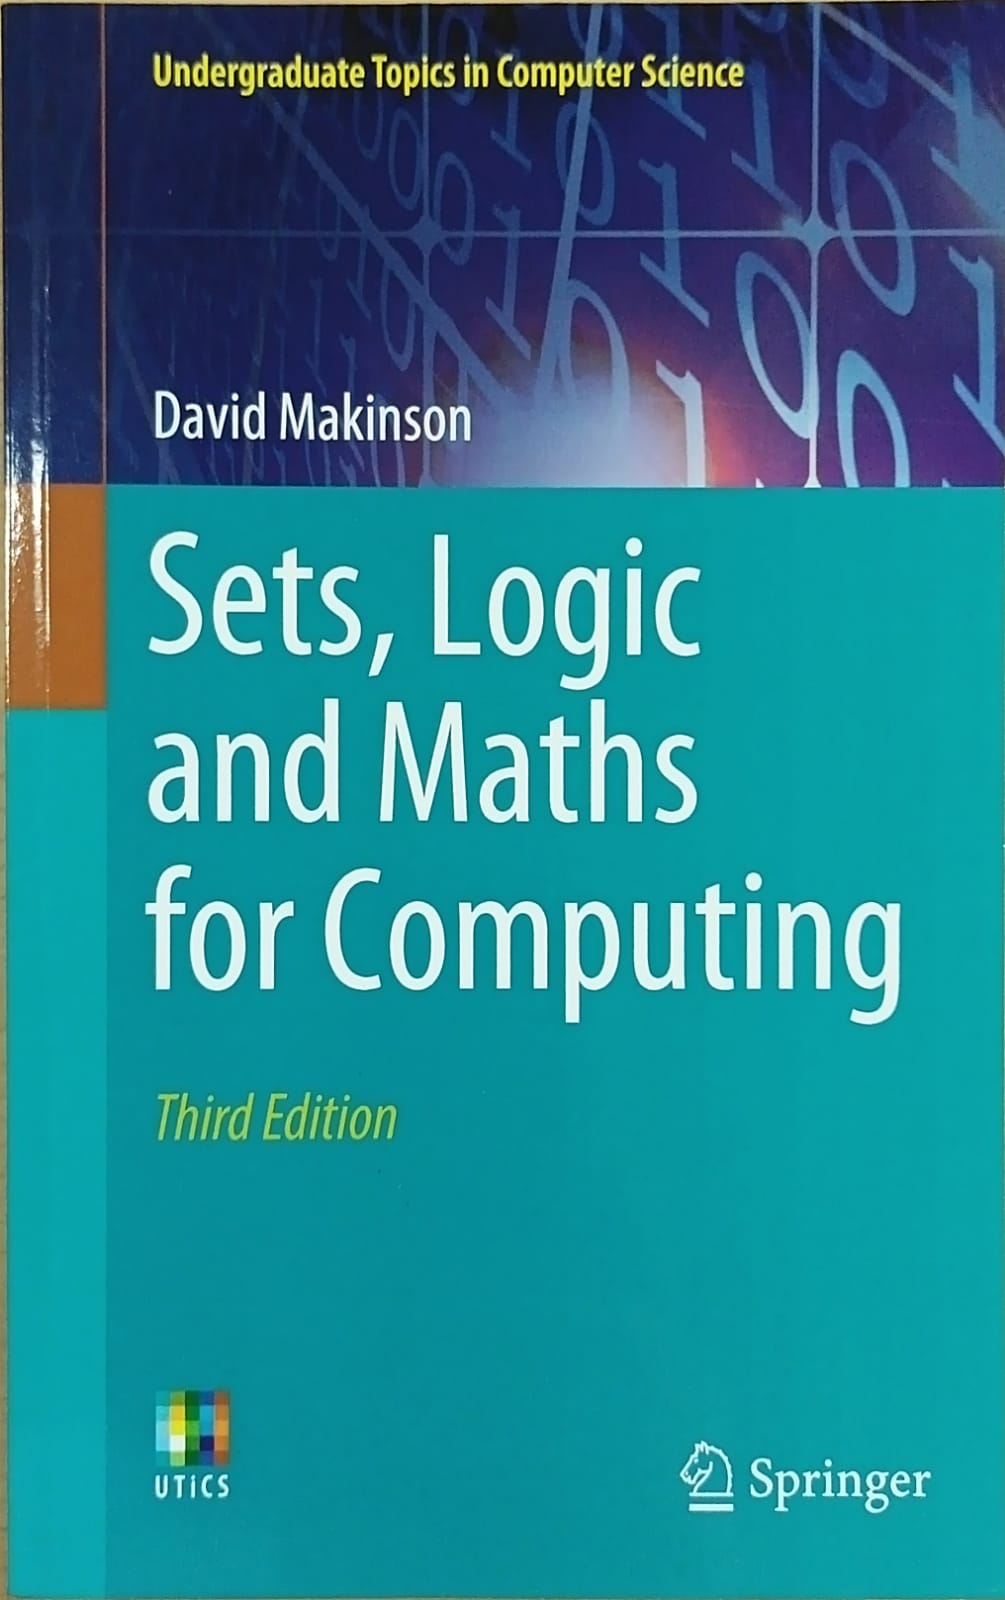 Sets, logic and maths for computing 3rd edition